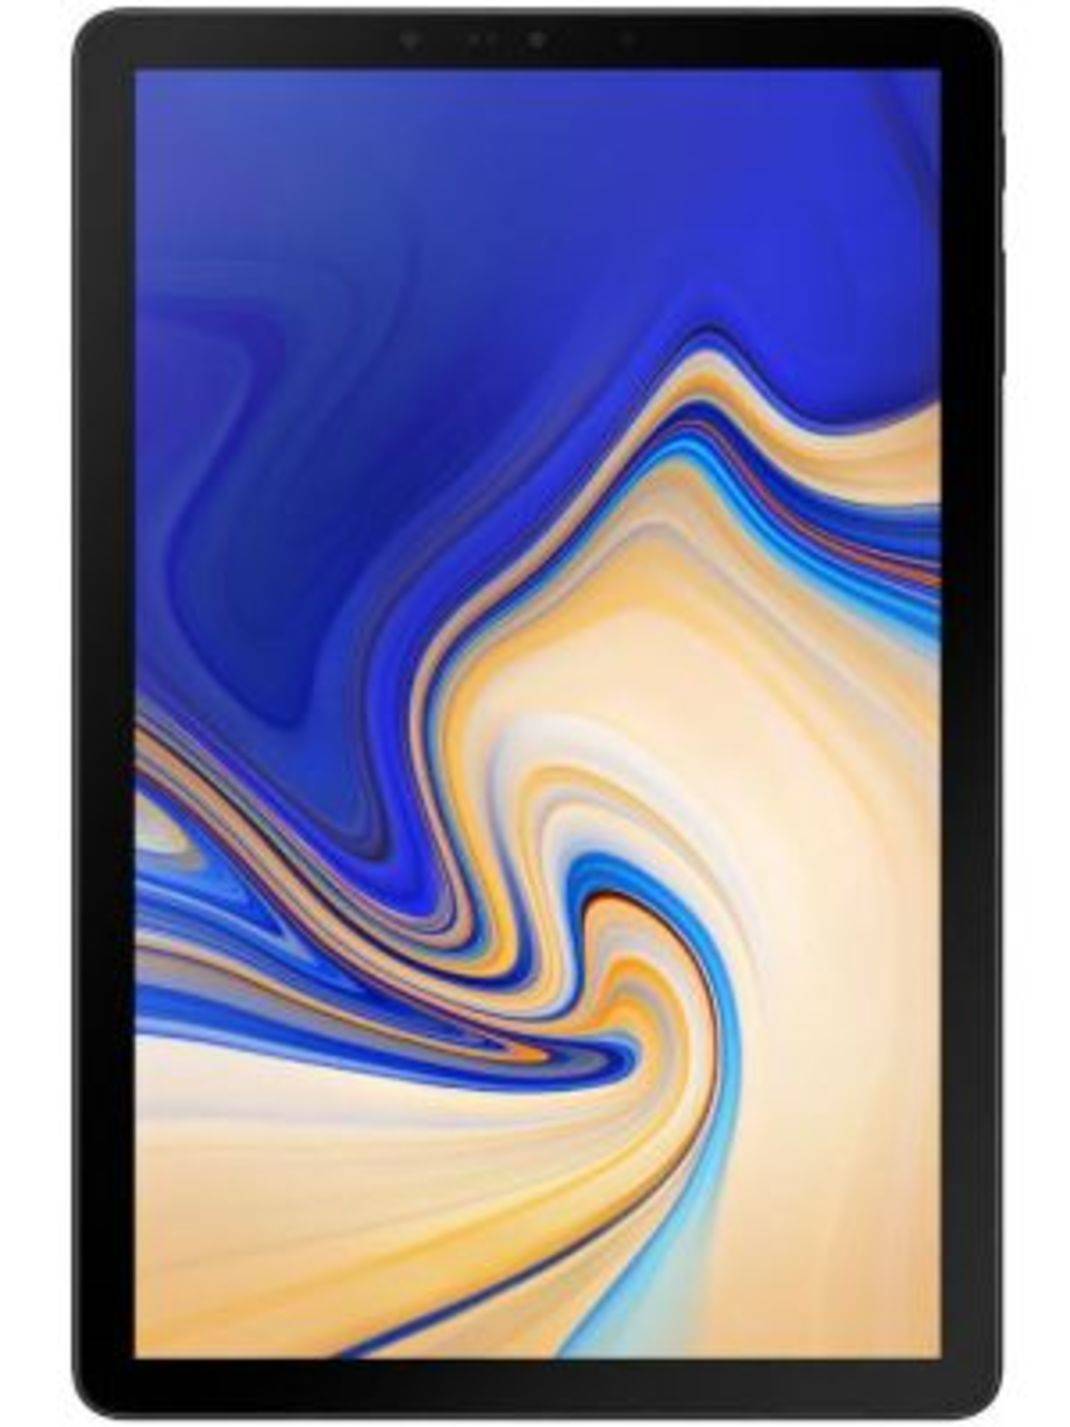 tij Reproduceren seksueel Compare Samsung Galaxy Tab S4 vs Samsung Galaxy Tab S7 FE 5G - Samsung  Galaxy Tab S4 vs Samsung Galaxy Tab S7 FE 5G Comparison by Price,  Specifications, Reviews &amp; Features 